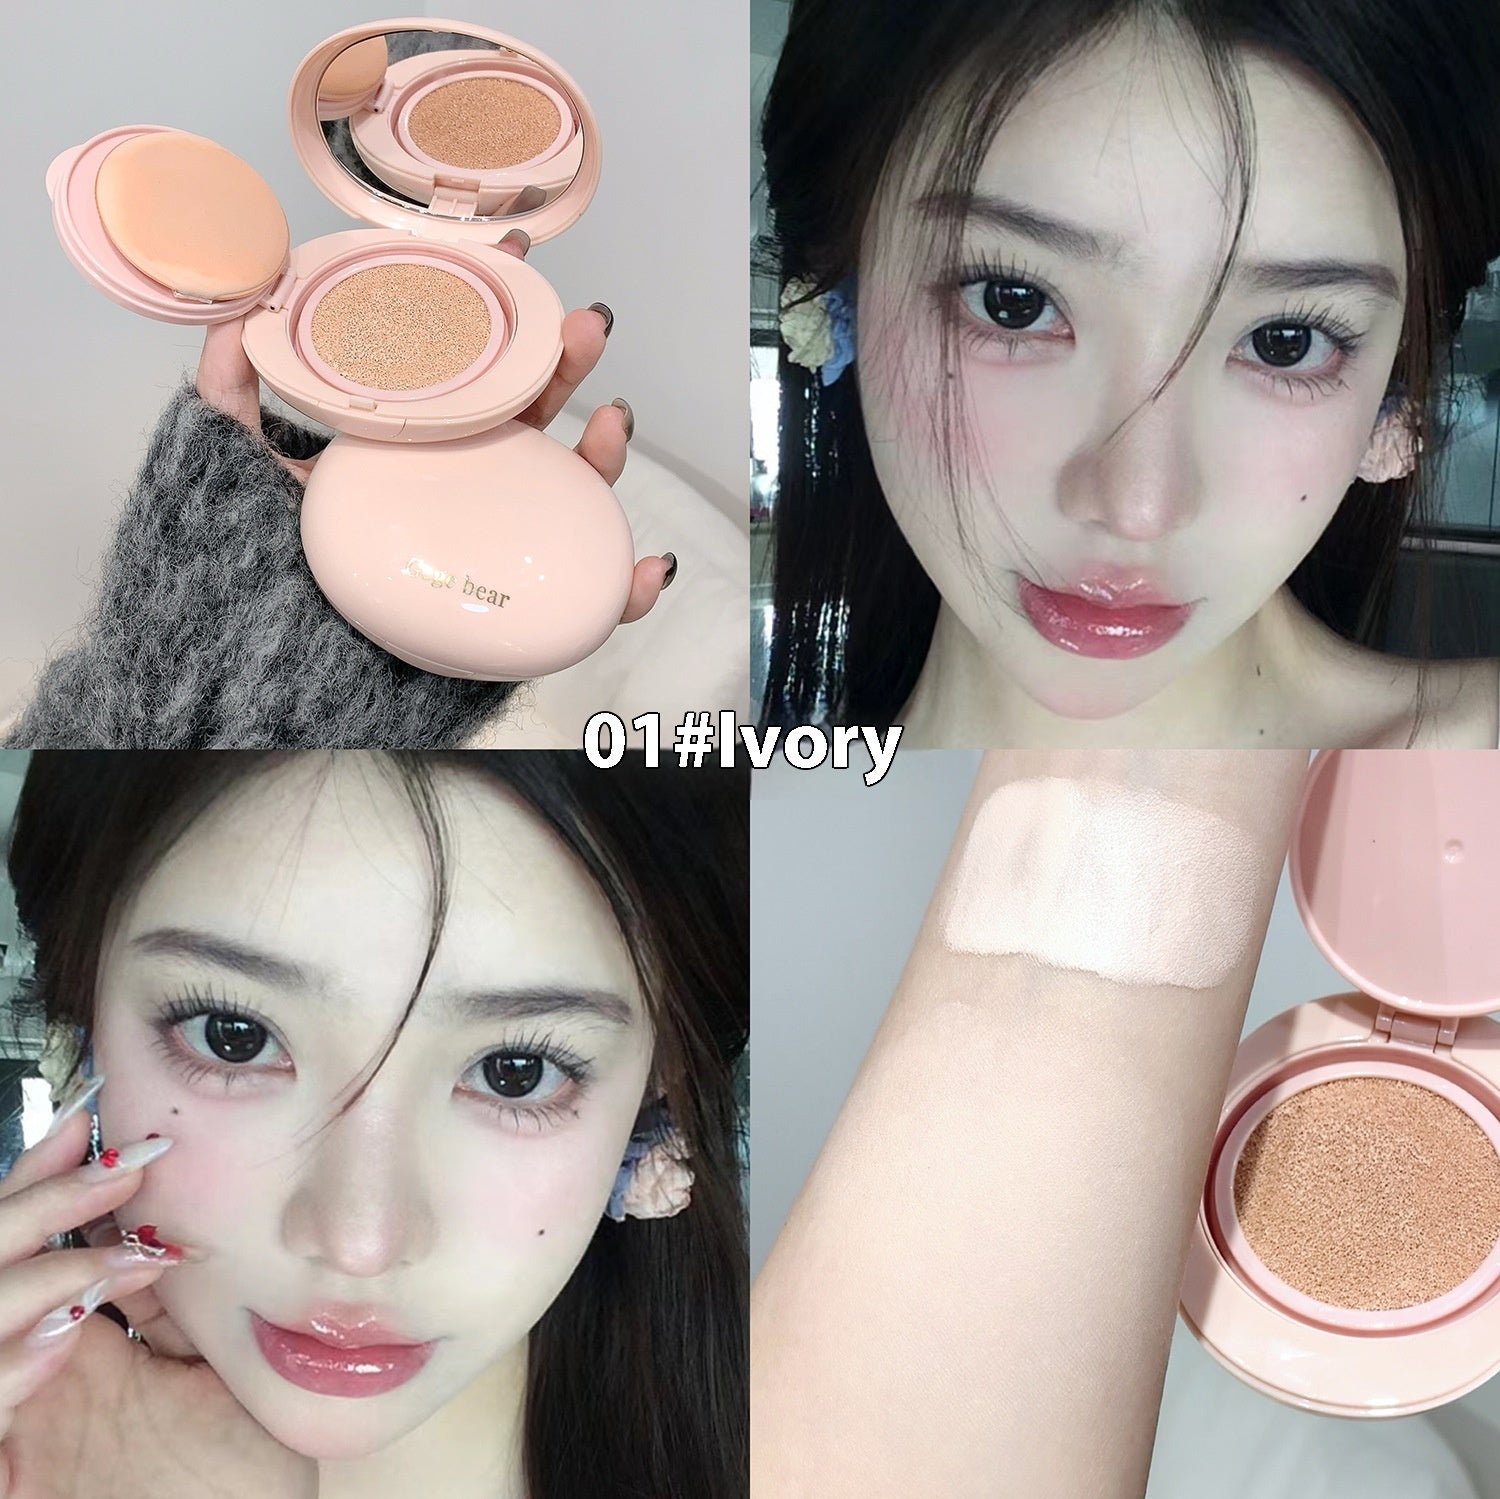 Cream Skin Light Luxury Face Cushion BB Cream Concealer Nude Color Makeup Girlish Style